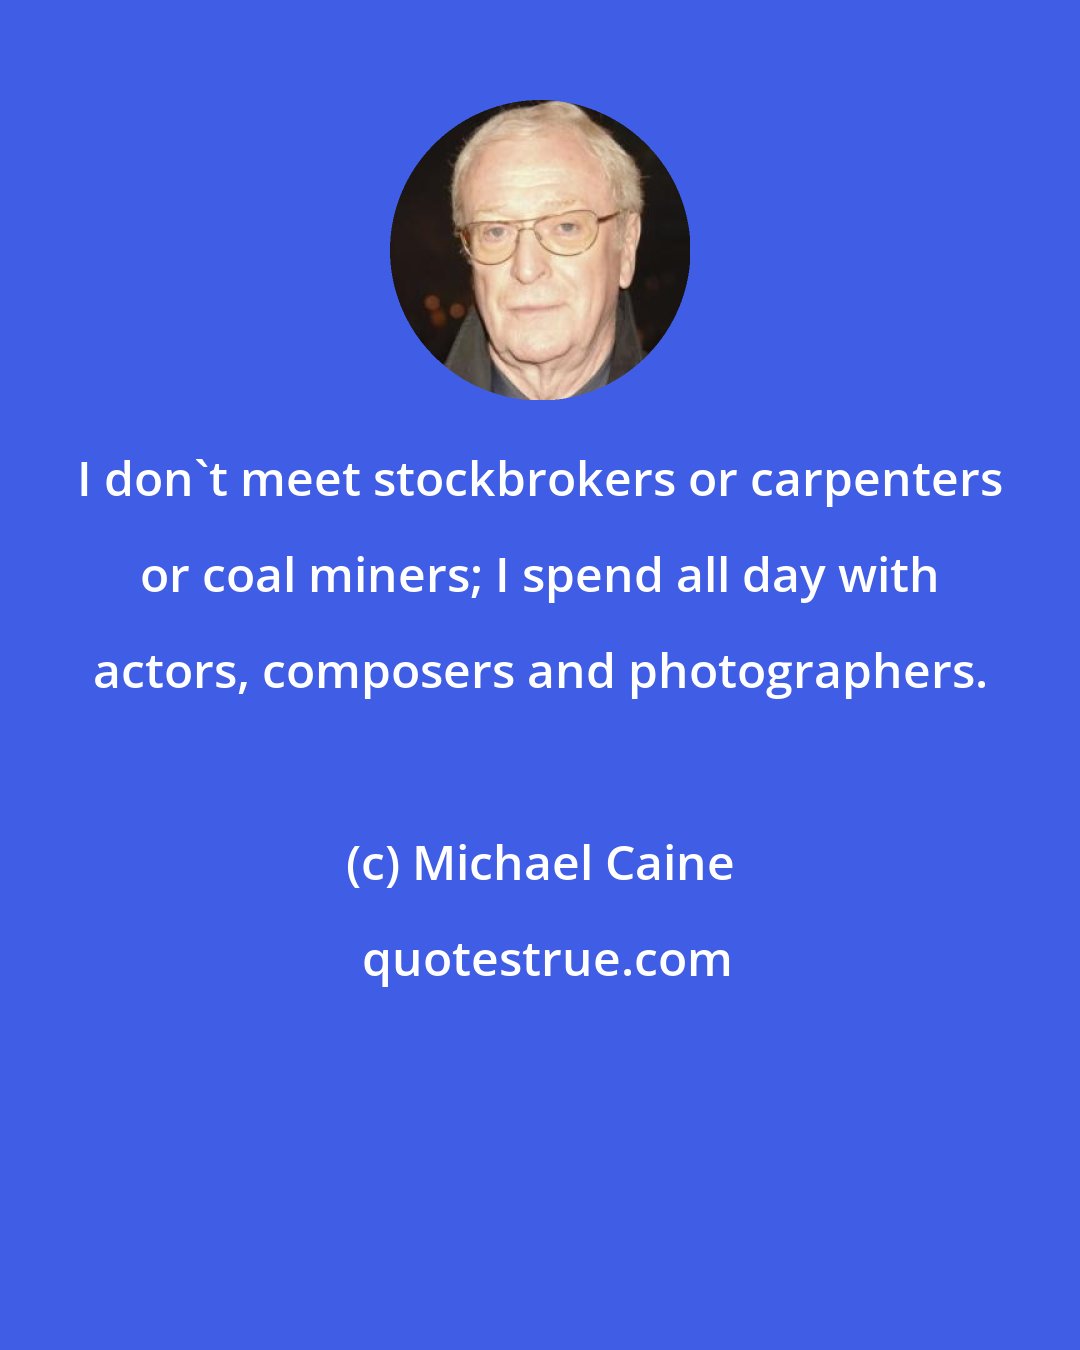 Michael Caine: I don't meet stockbrokers or carpenters or coal miners; I spend all day with actors, composers and photographers.